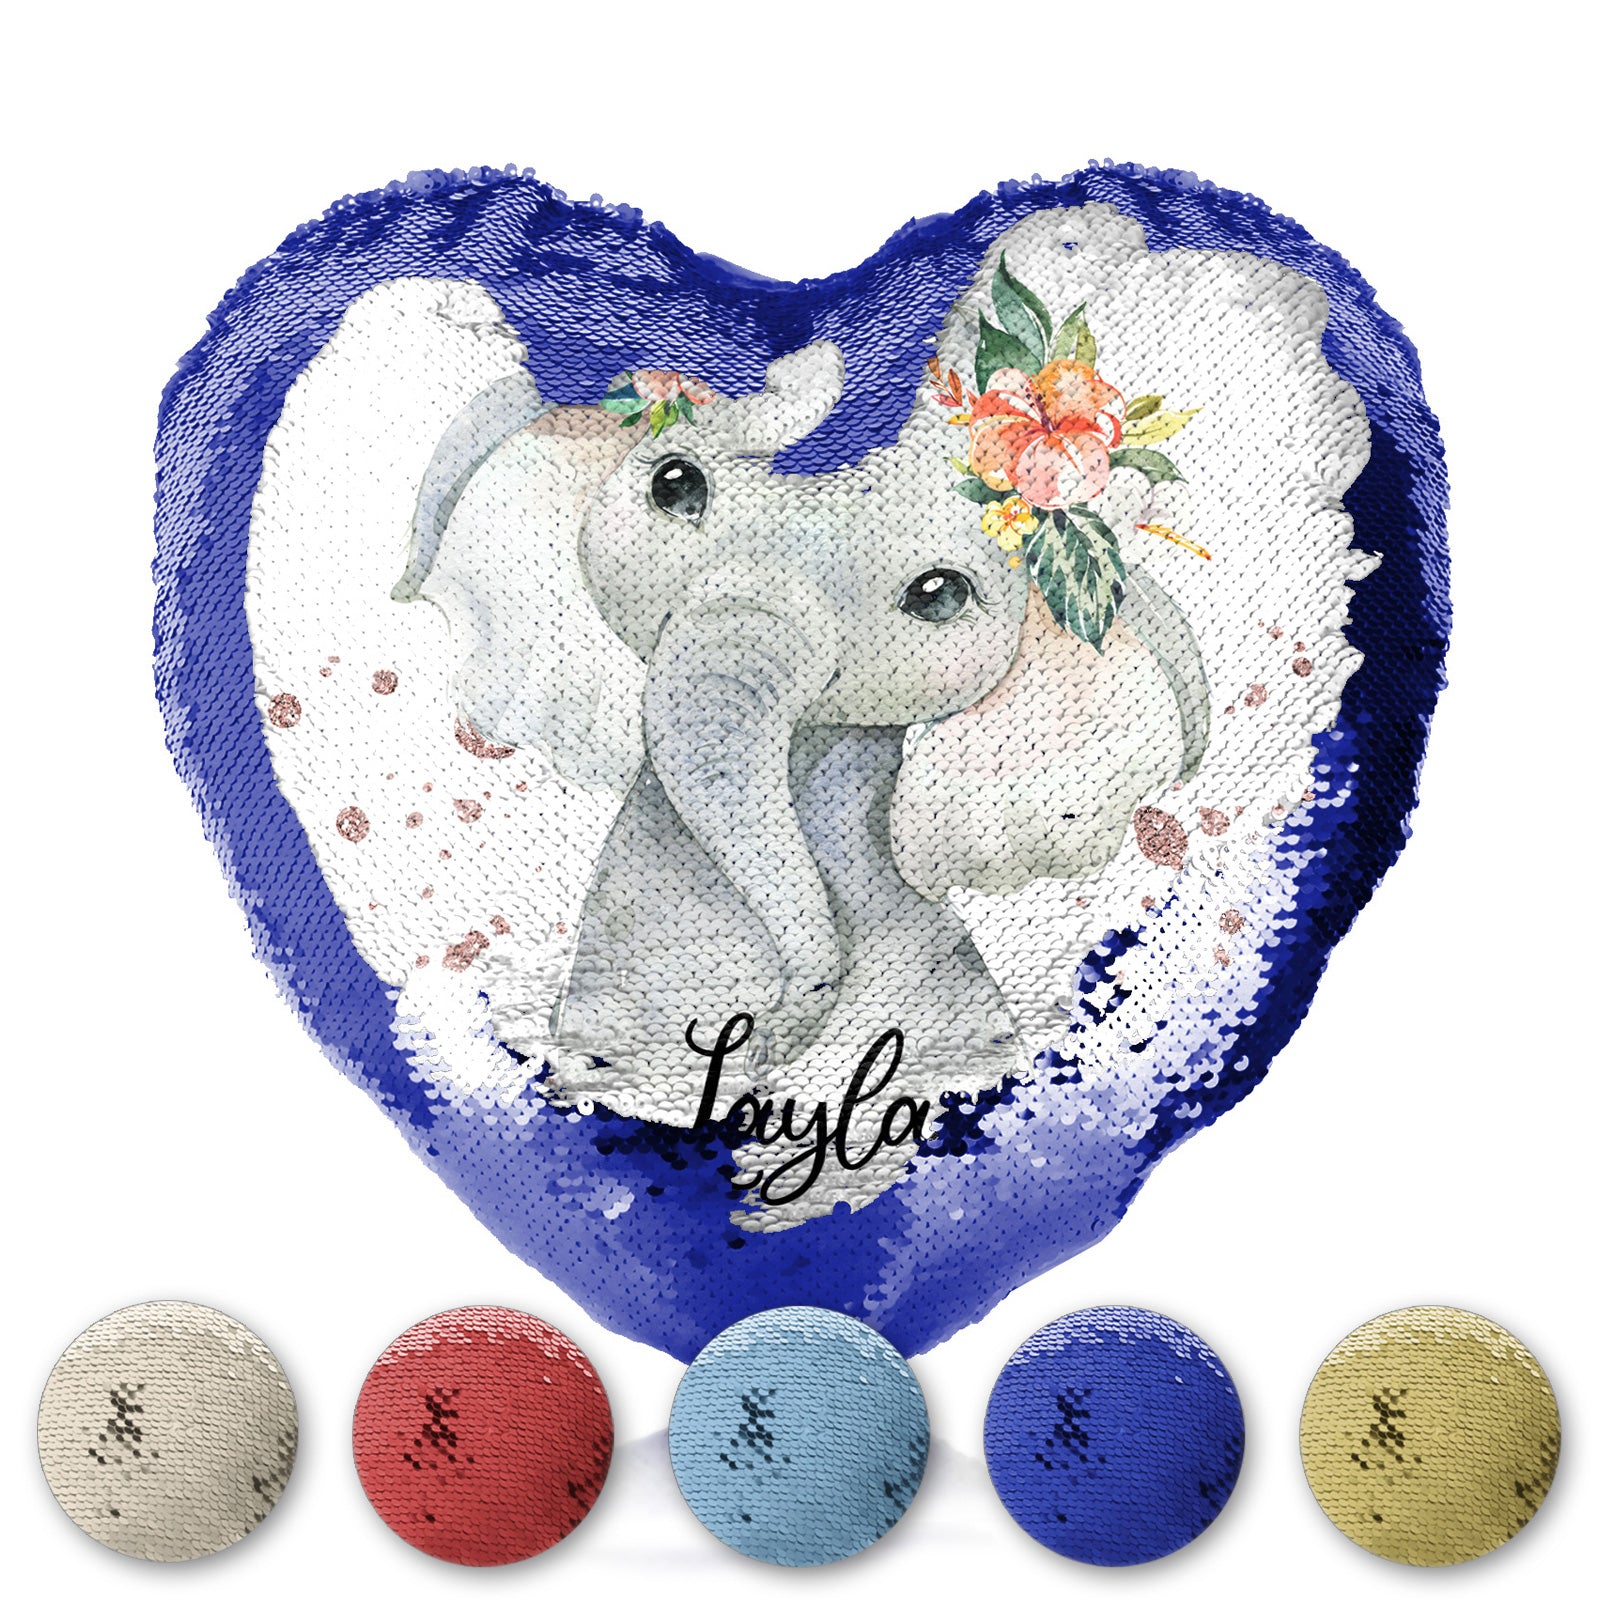 Personalised Sequin Heart Cushion with Elephant Rain Drop Glitter Print and Cute Text